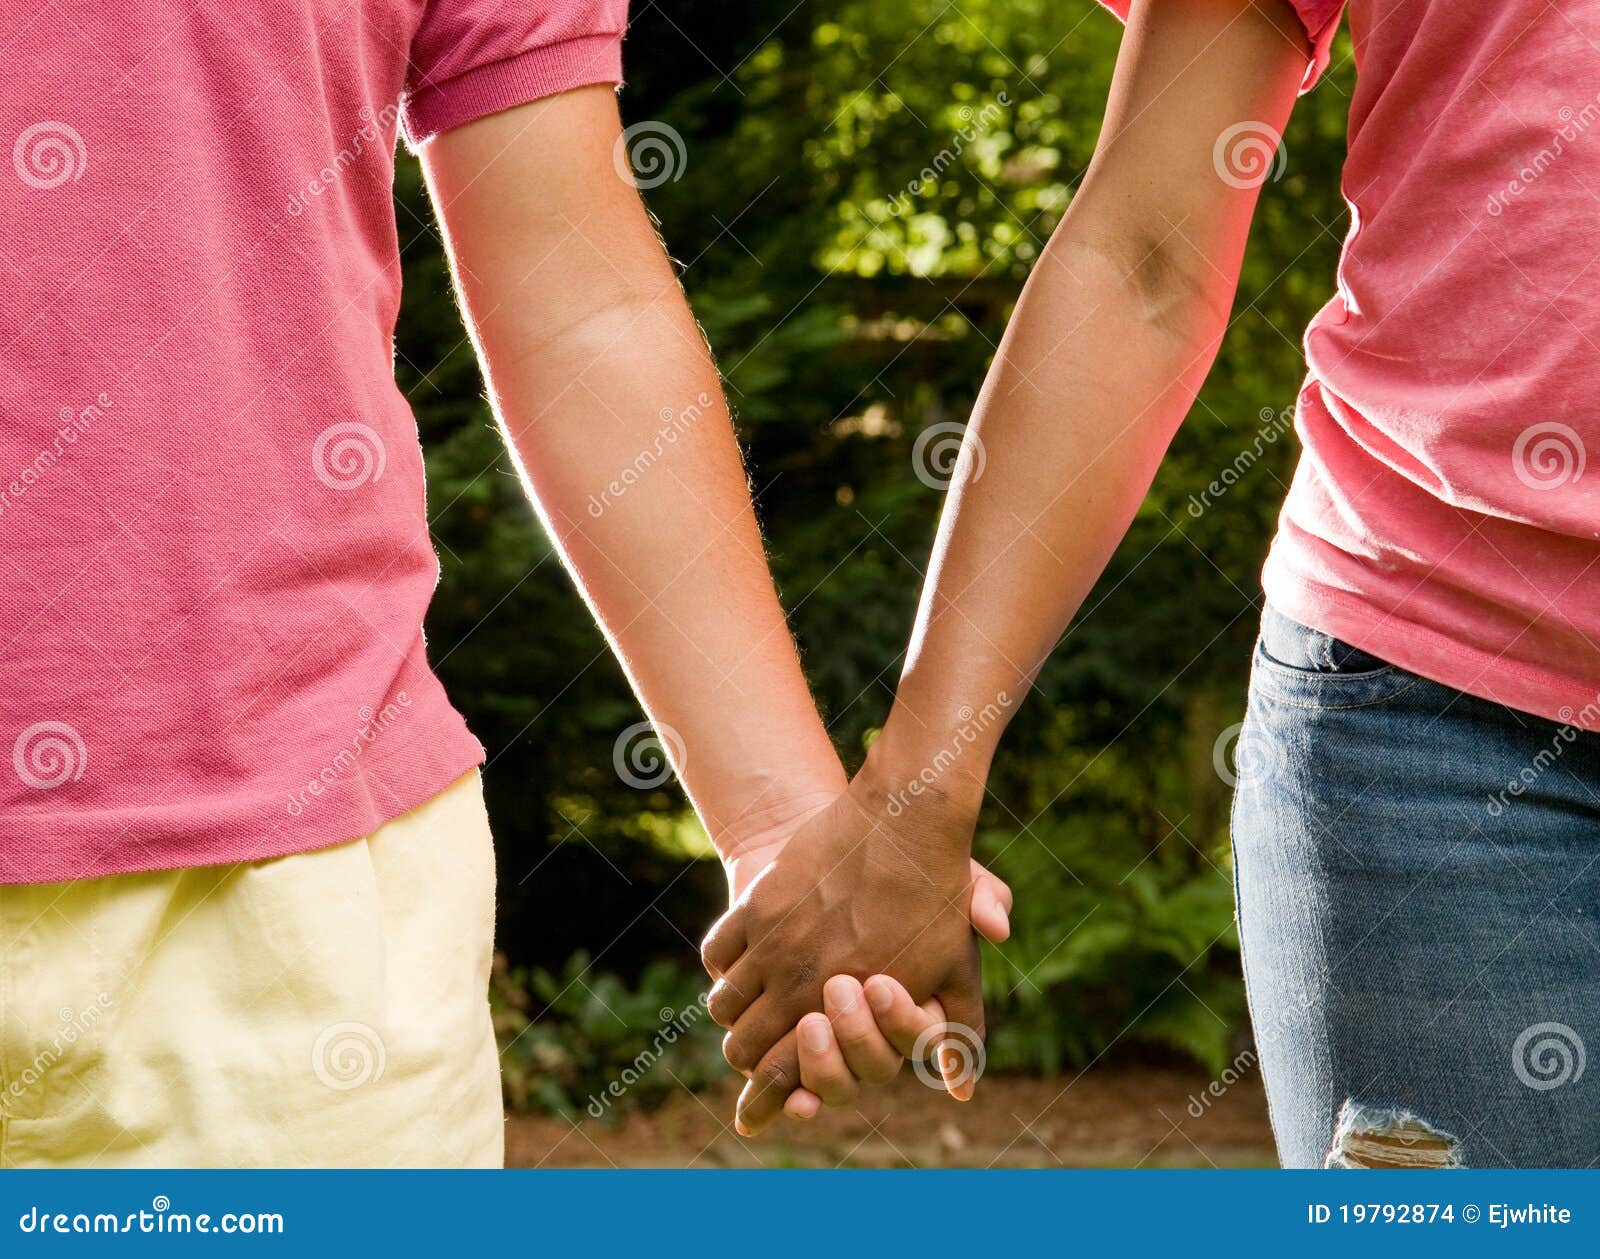 Interracial Romance Of Native Girl And White Man RoyaltyFree Stock